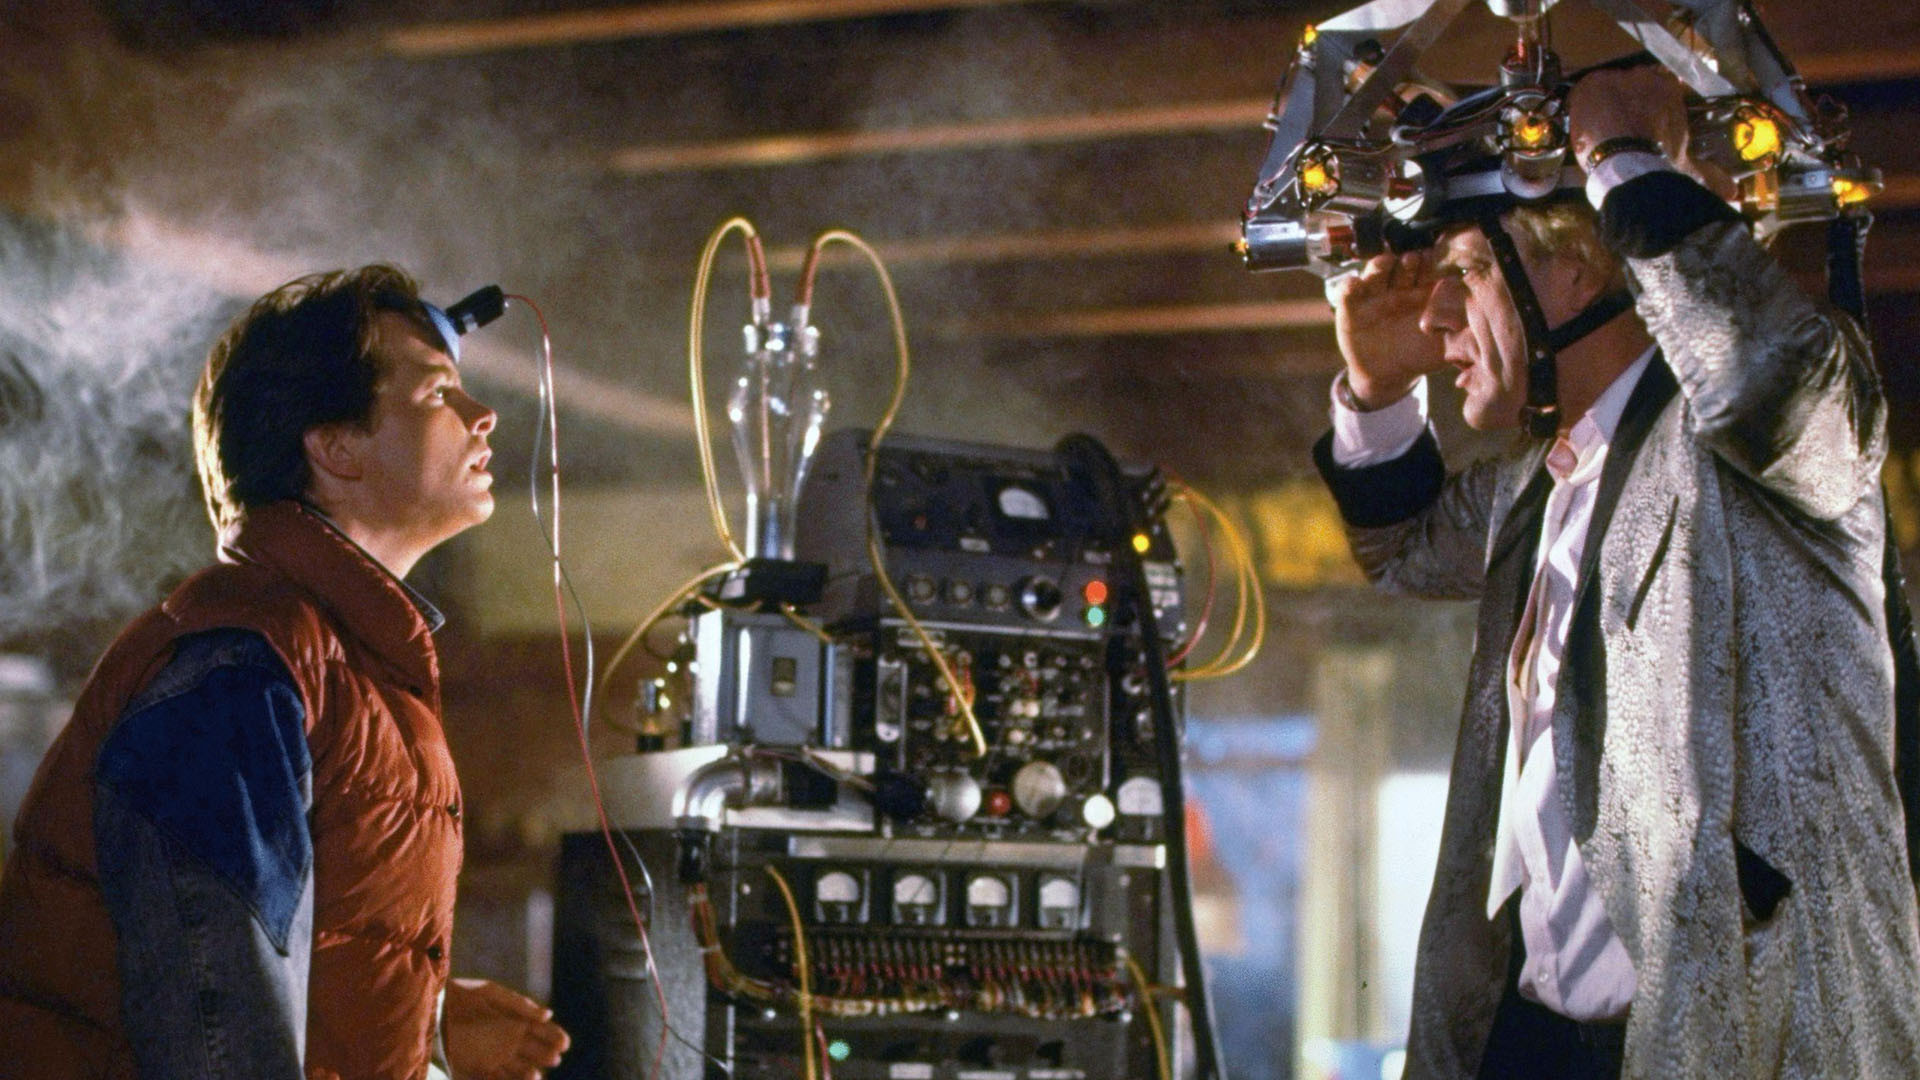 Is there a fundamental flaw in the Back to the Future films?